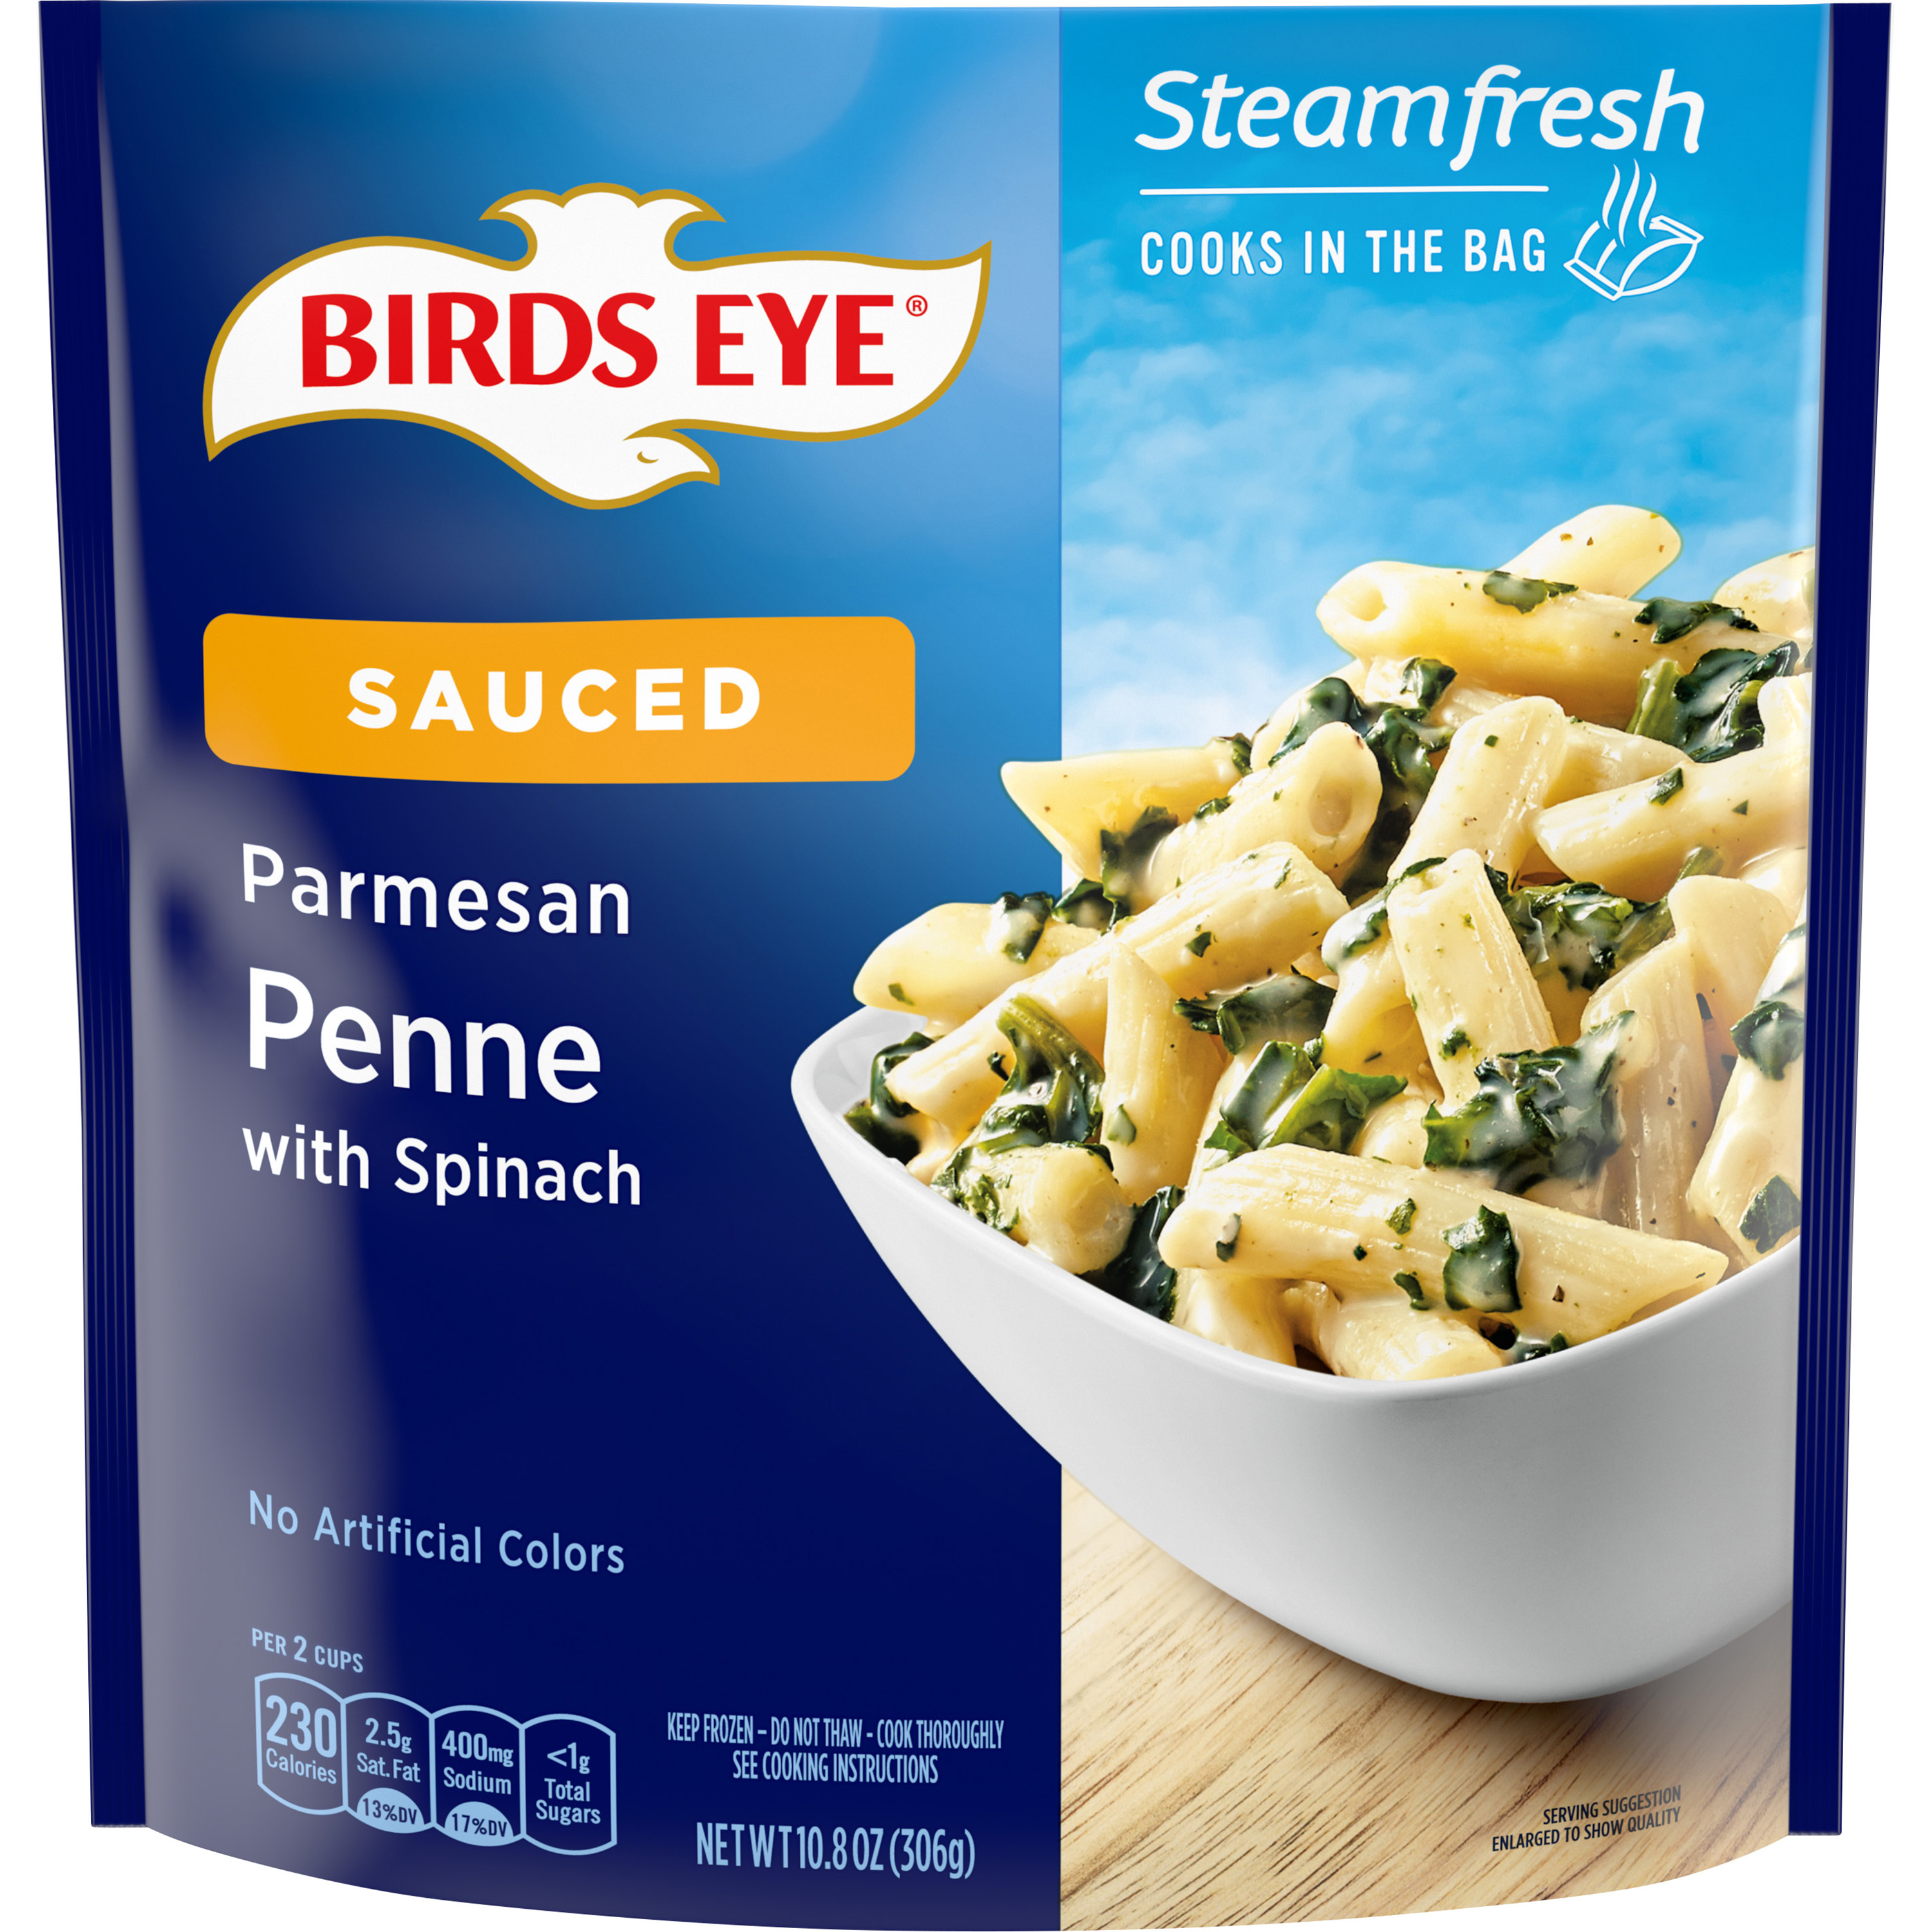 Birds Eye Steamfresh Chef’s Favorites Sauced Penne with Spinach & Parmesan Sauce